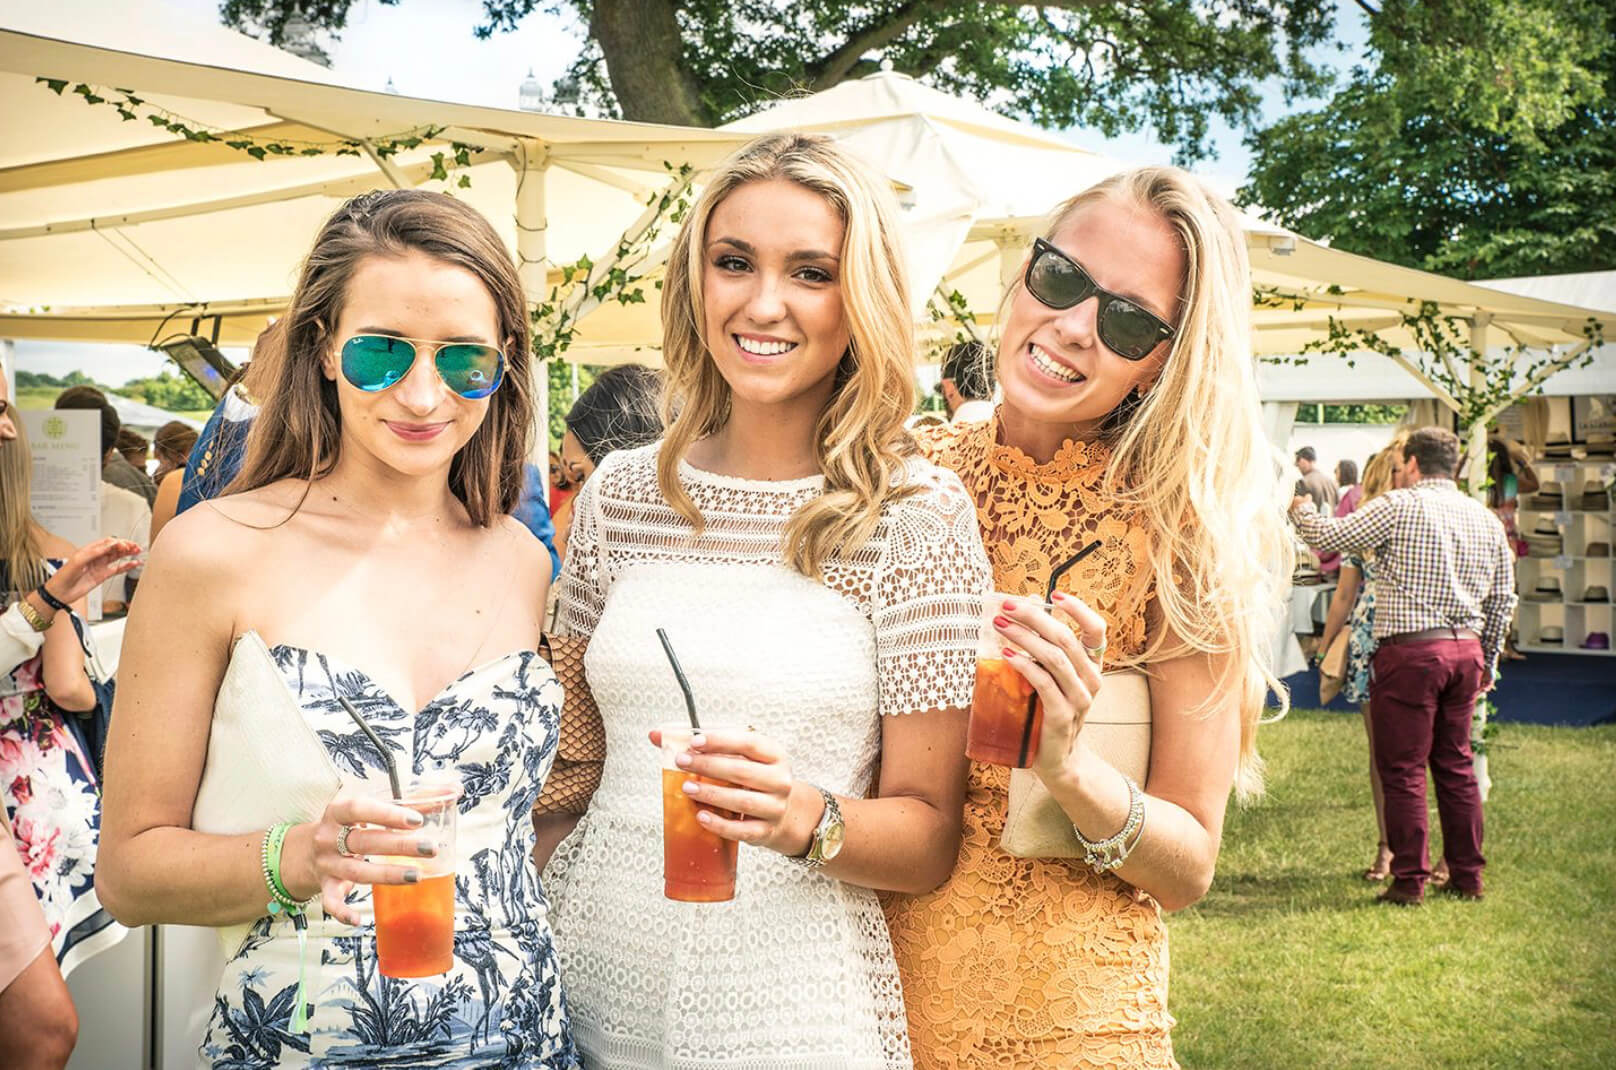 LUXURIA LIFESTYLE INTERNATIONAL SHOWCASES THE ROYAL HENLY REGATTA AND LEGENDARY CHINAWHITE PARTY